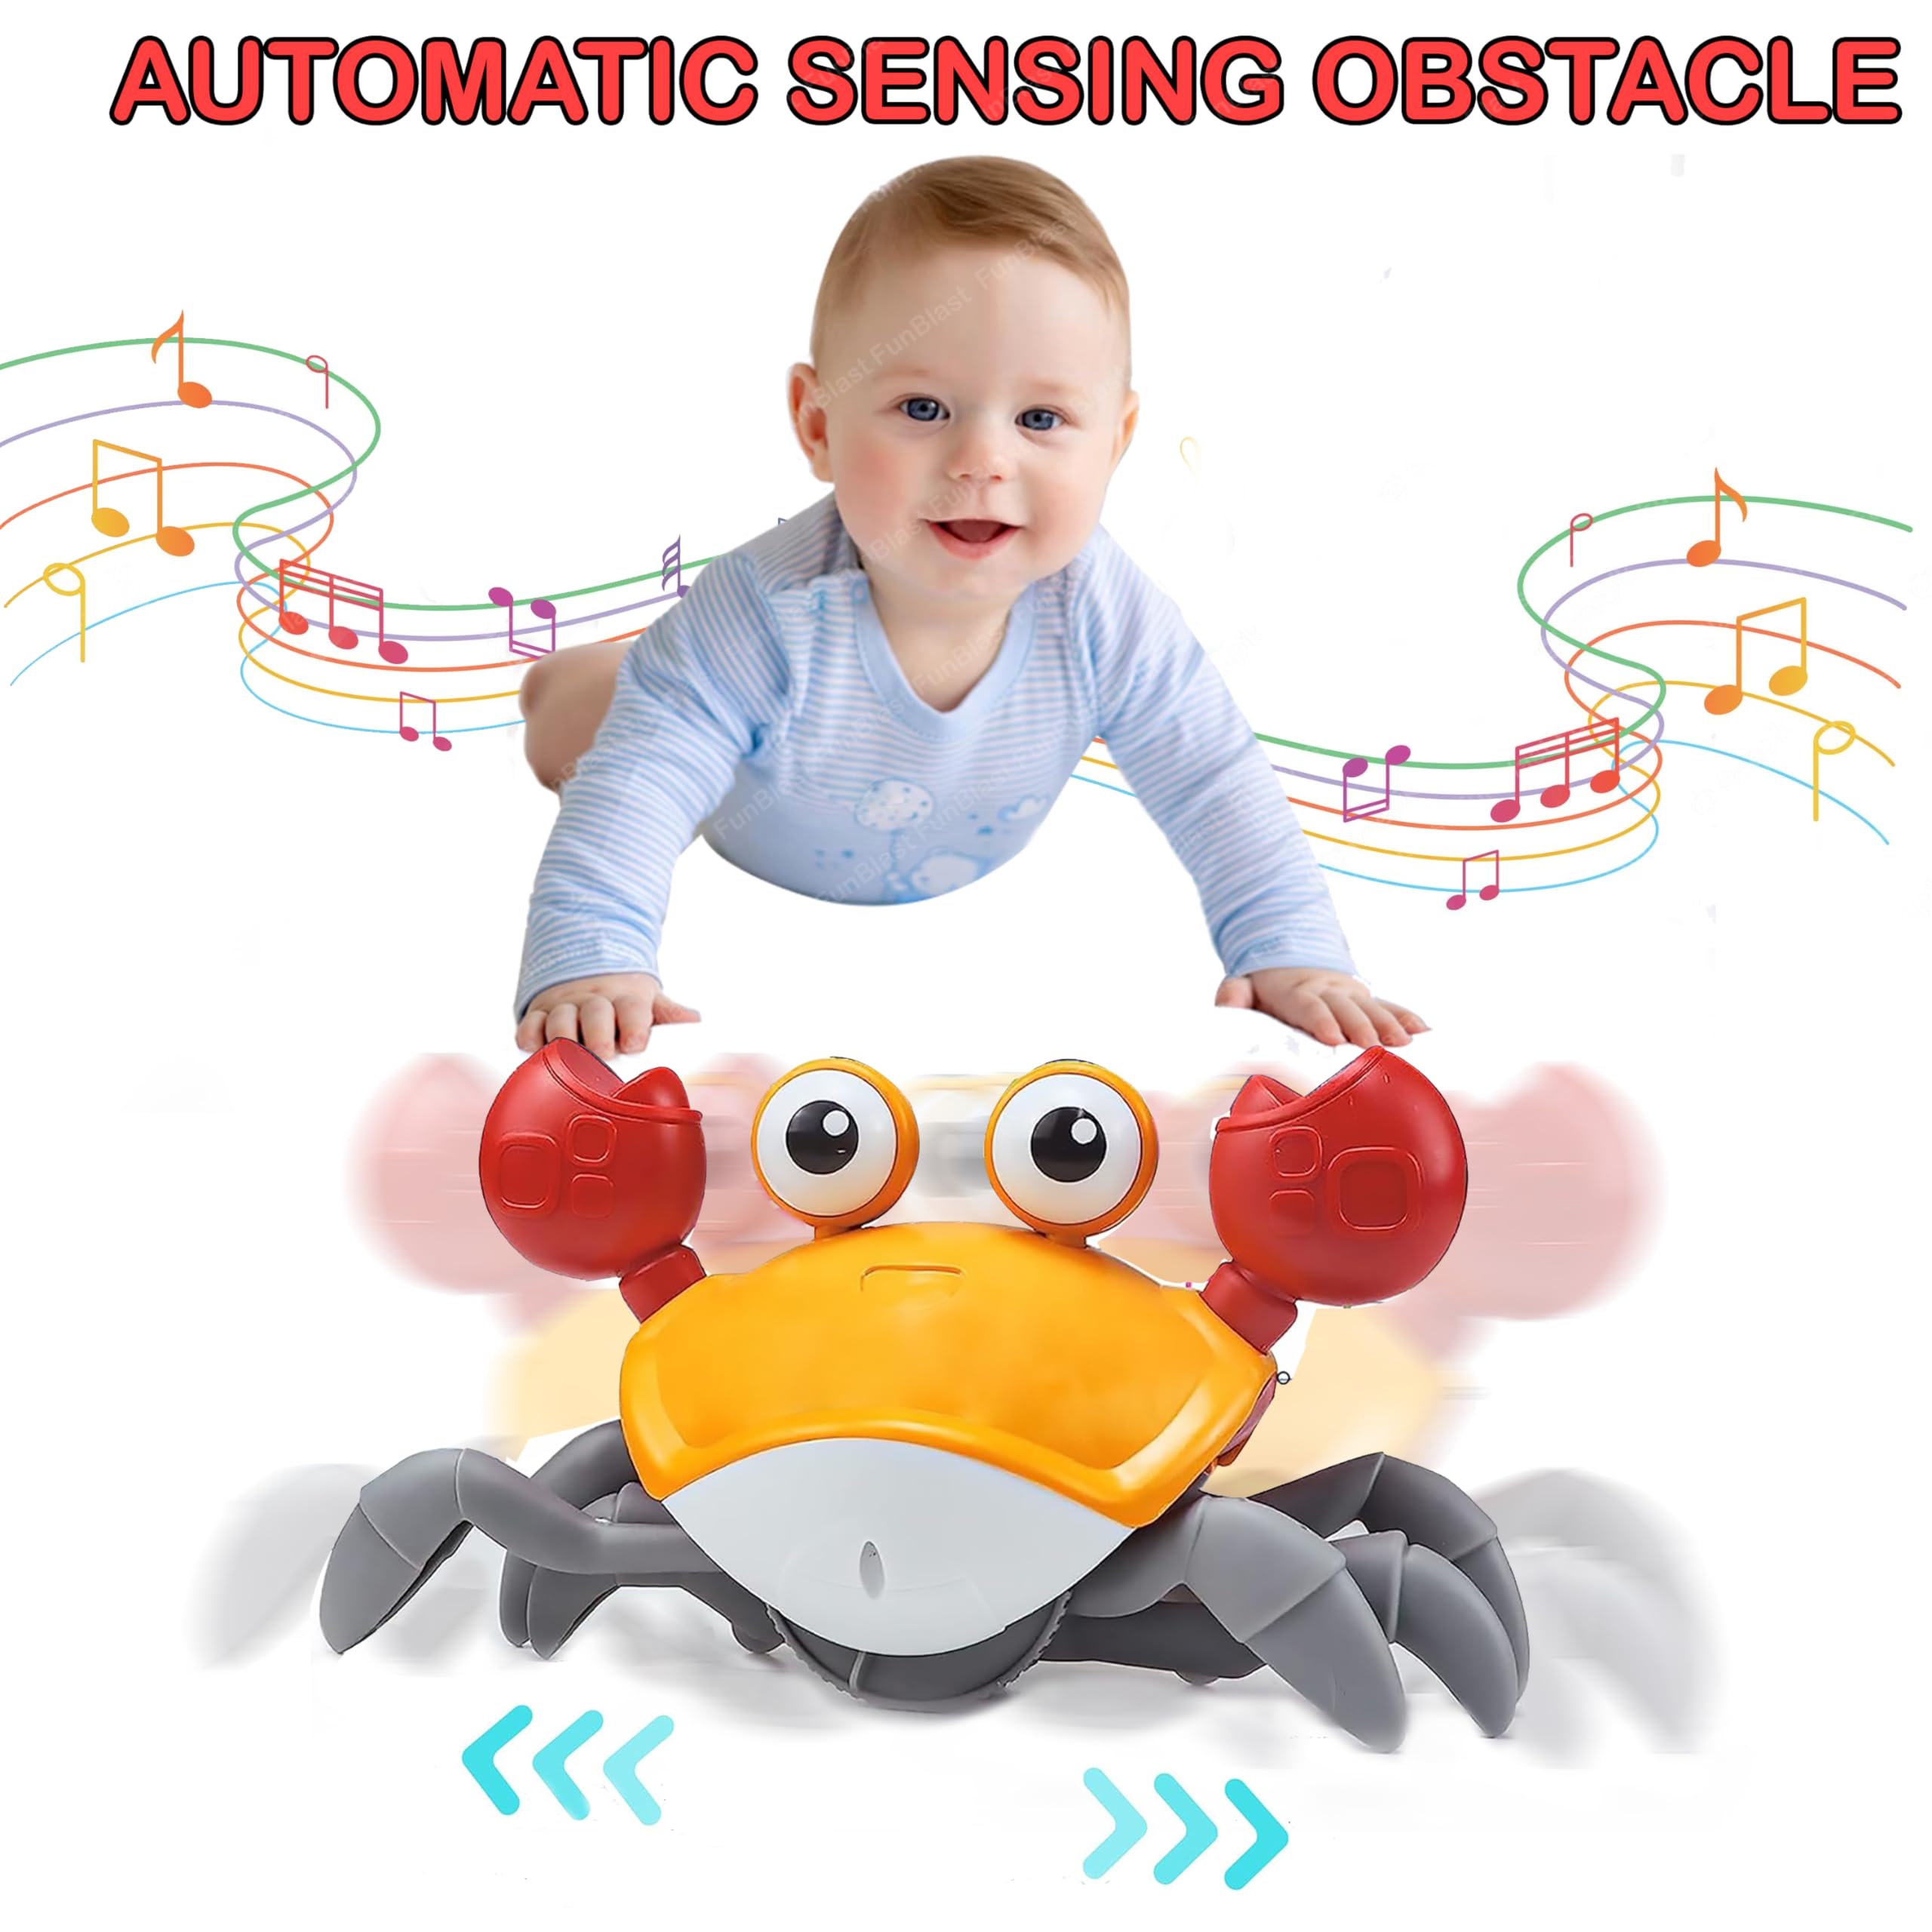 Crawling Crab Toy for Kids - Dancing Crawling Baby Toys, Electronic Walking Moving Toys for Babies Infant Toddlers Fun Play Interactive Early Learning Educational Toys (Random Color)